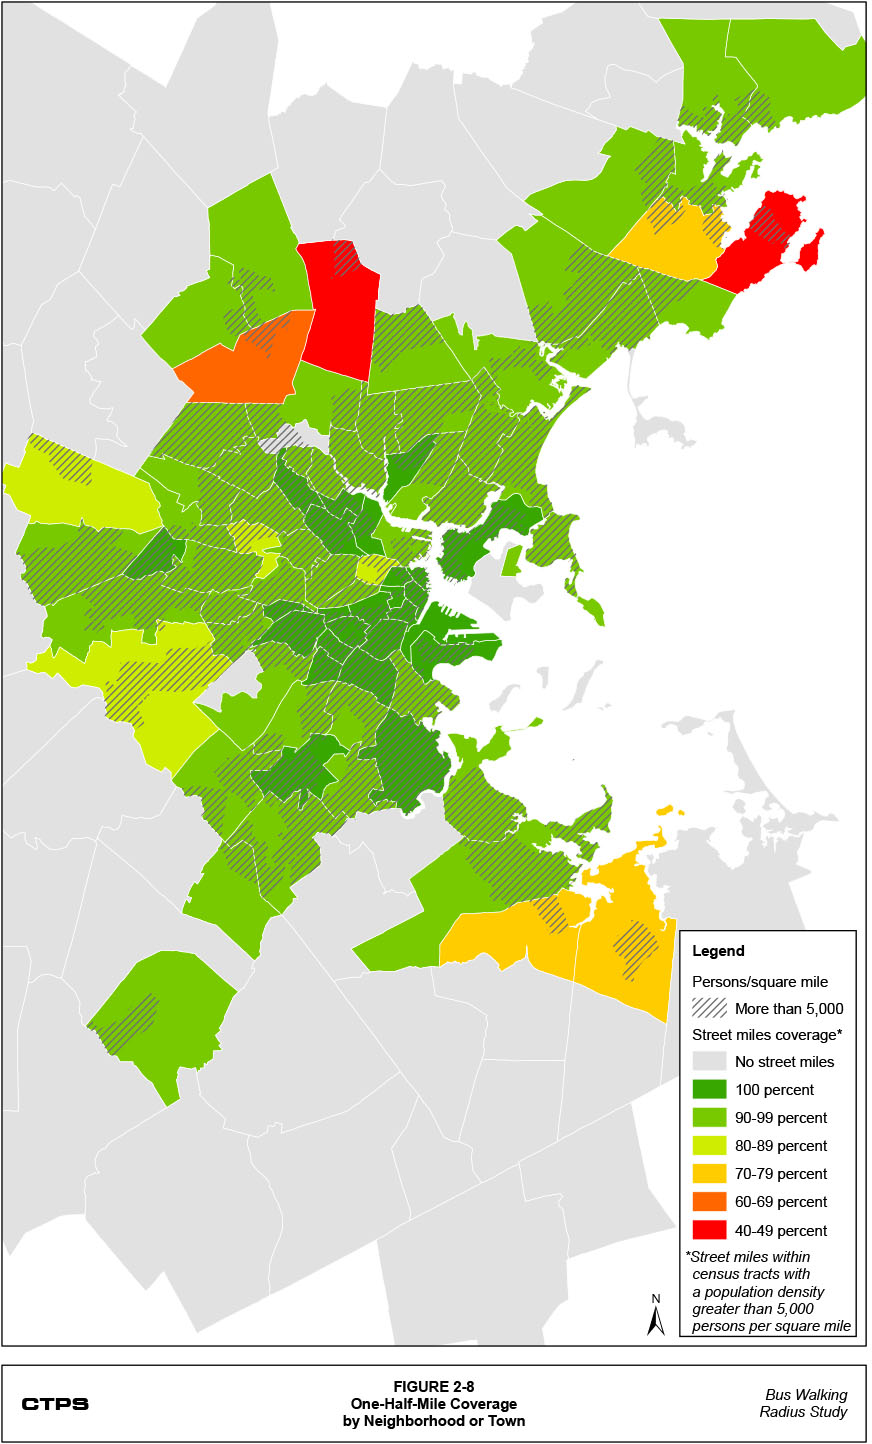 Figure 2-8: One-Half-Mile Coverage by Neighborhood or Town. This is a map that shows the location of census tracts with a population density greater than 5,000 persons per square mile. It also shows, for each town that has at least one of these census tracts, that town’s street mile coverage.